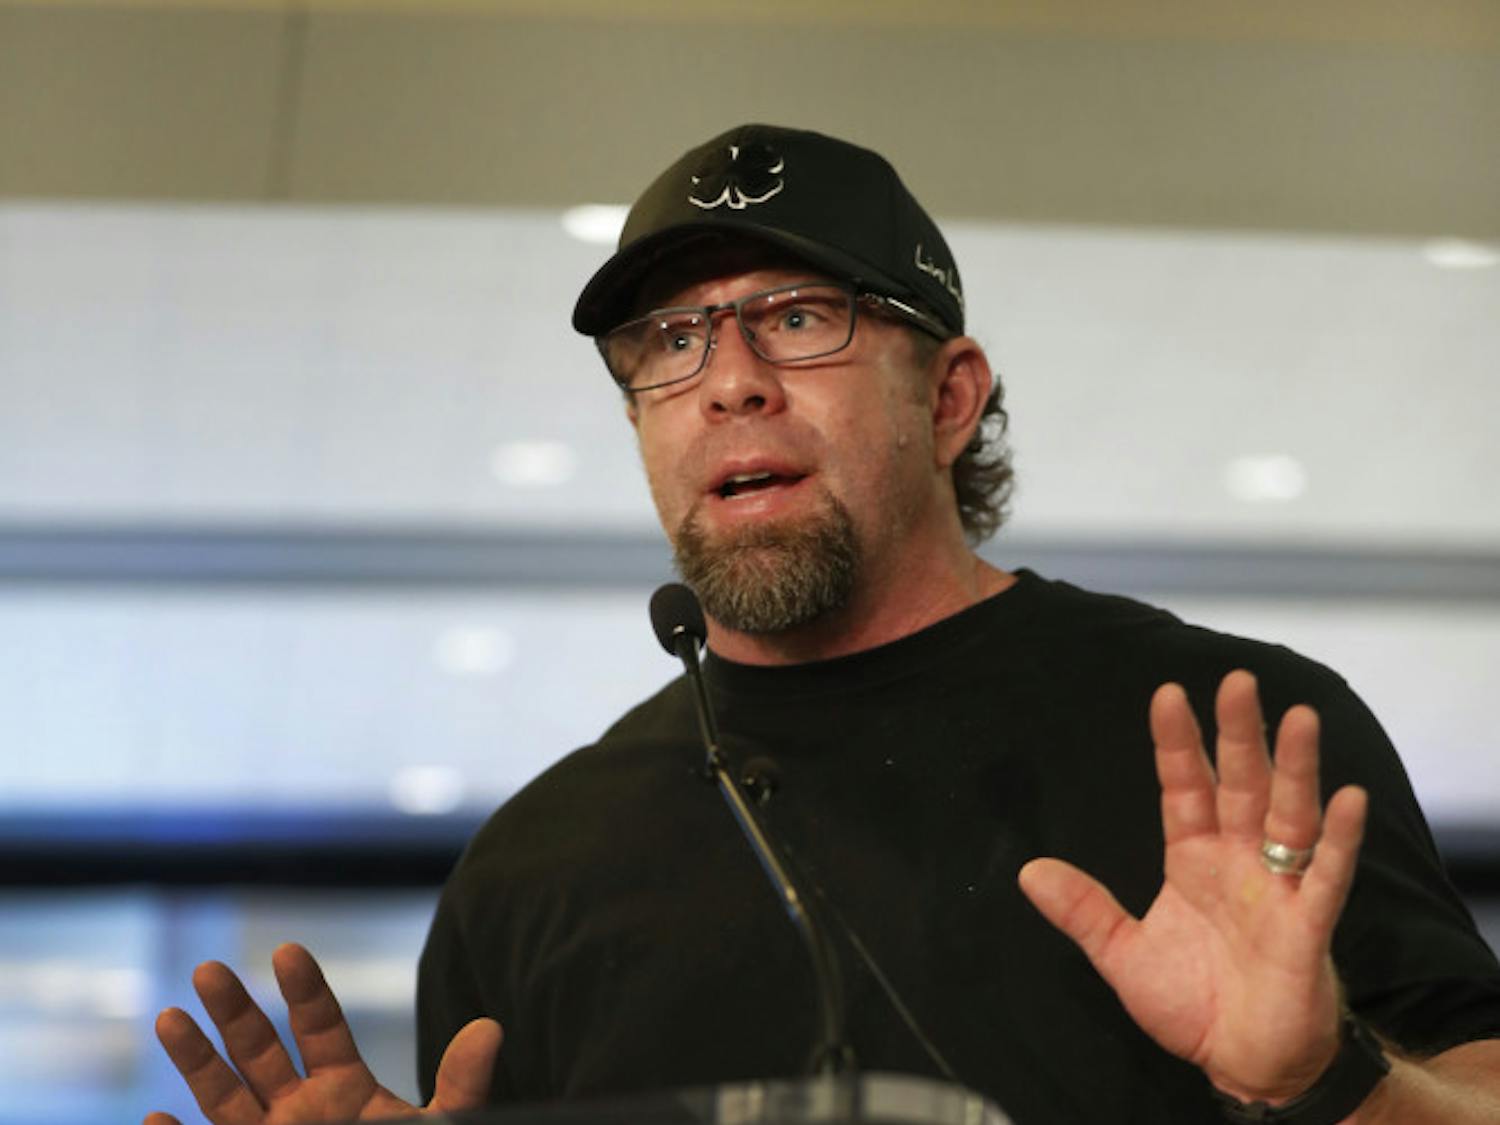 Former Houston Astros first baseman Jeff Bagwell speaks to reporters Wednesday Jan. 18, 2017, in Houston, after his election to baseball's Hall of Fame was announced. (Karen Warren/Houston Chronicle via AP)